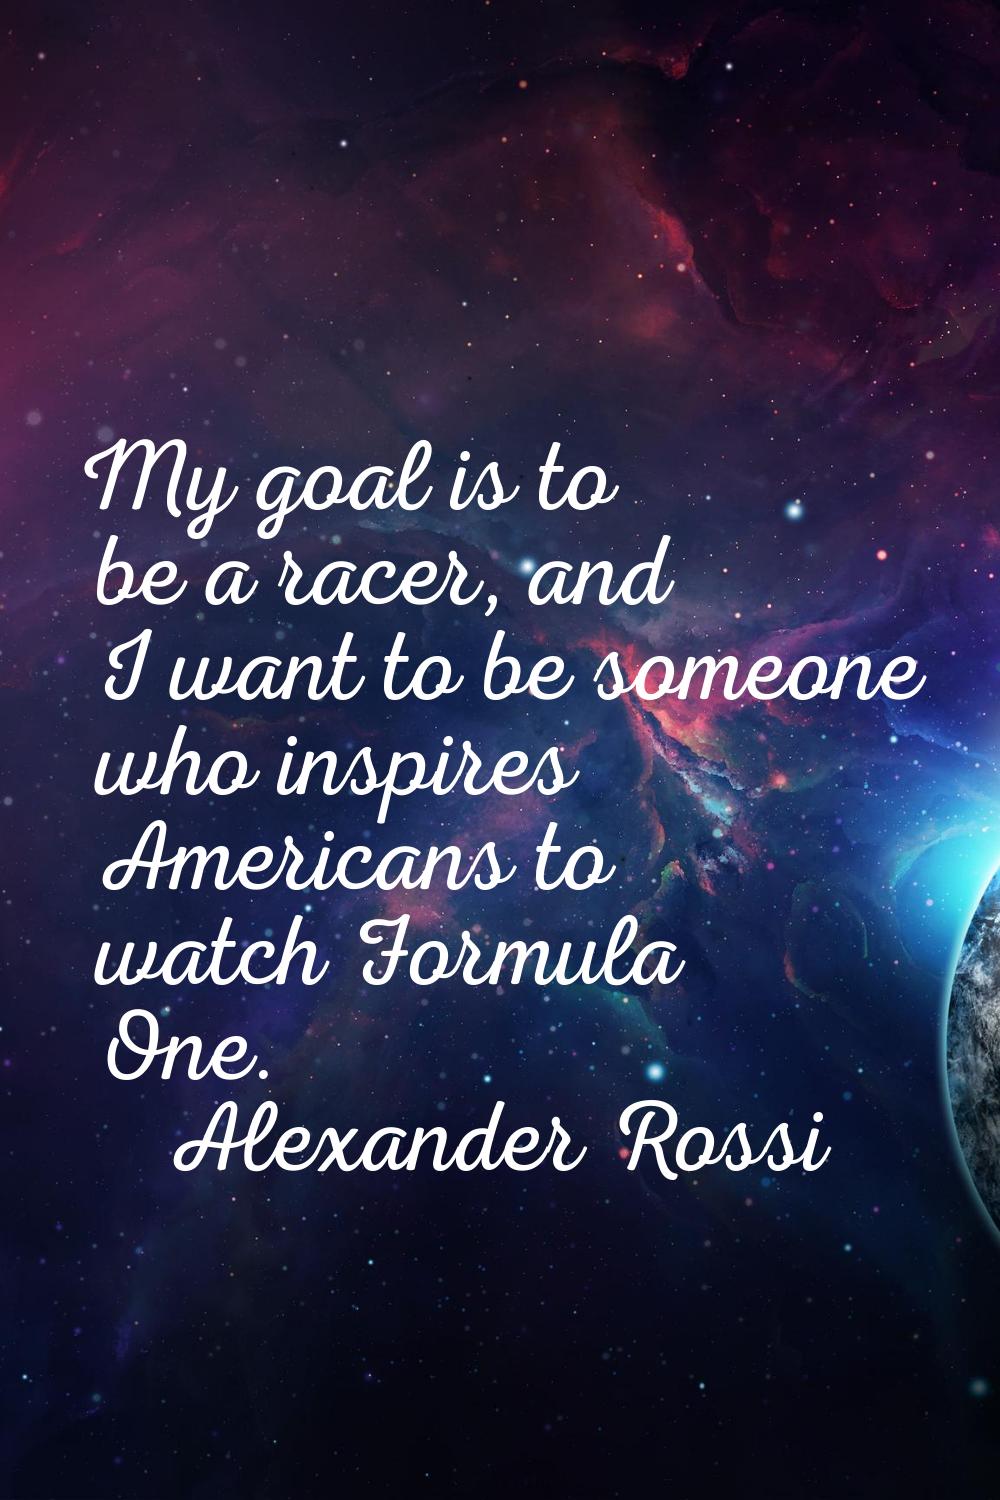 My goal is to be a racer, and I want to be someone who inspires Americans to watch Formula One.